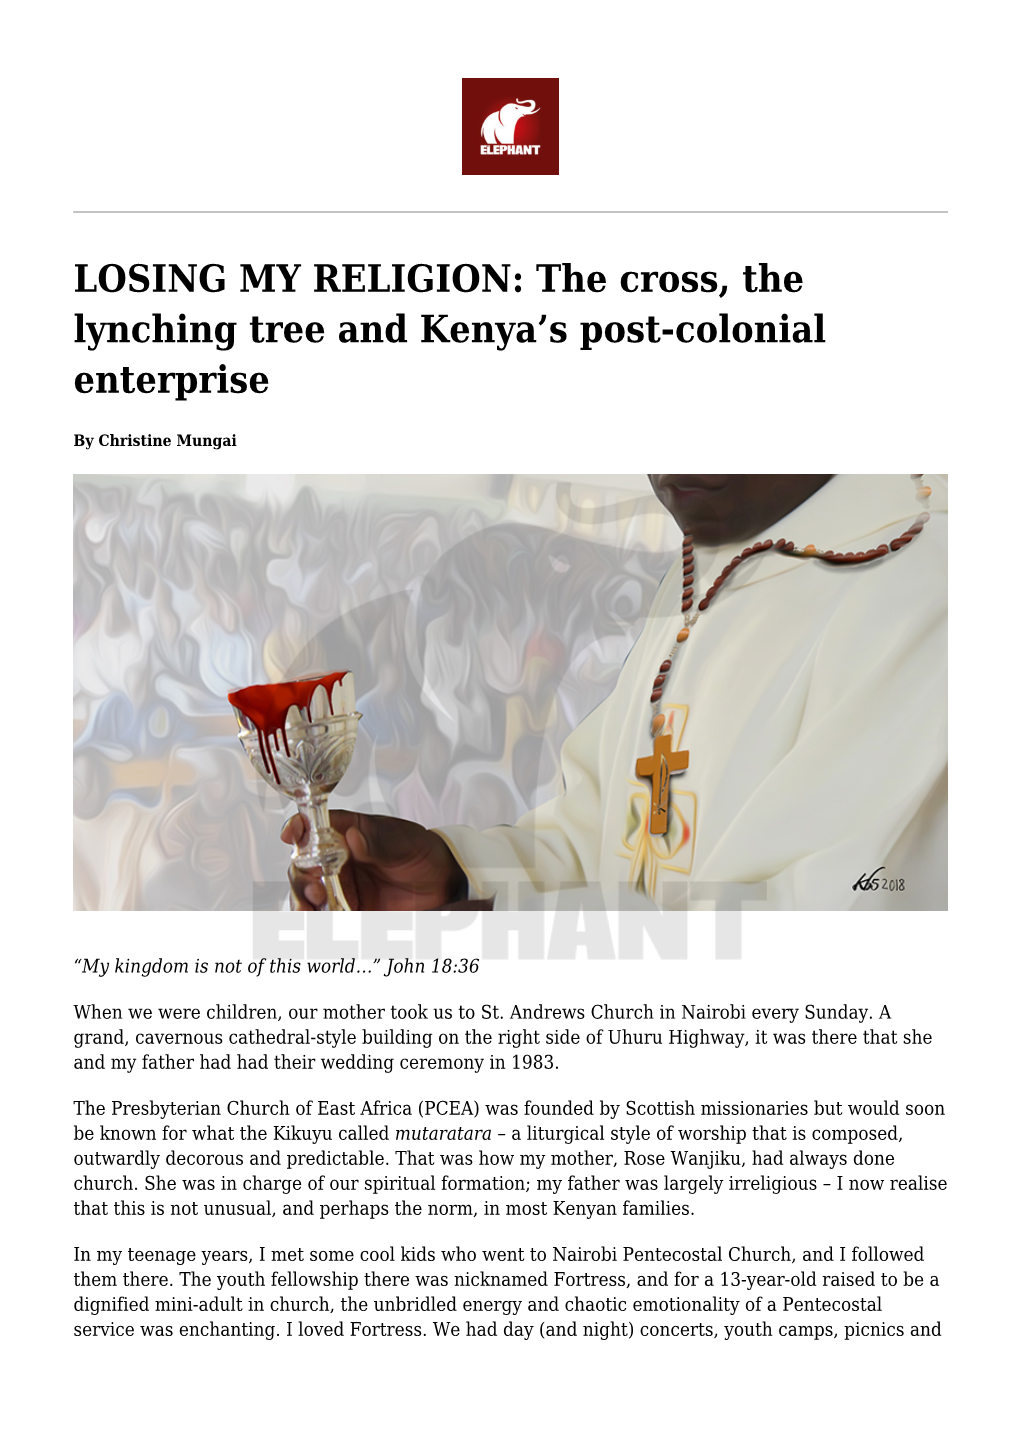 LOSING MY RELIGION: the Cross, the Lynching Tree and Kenya's Post